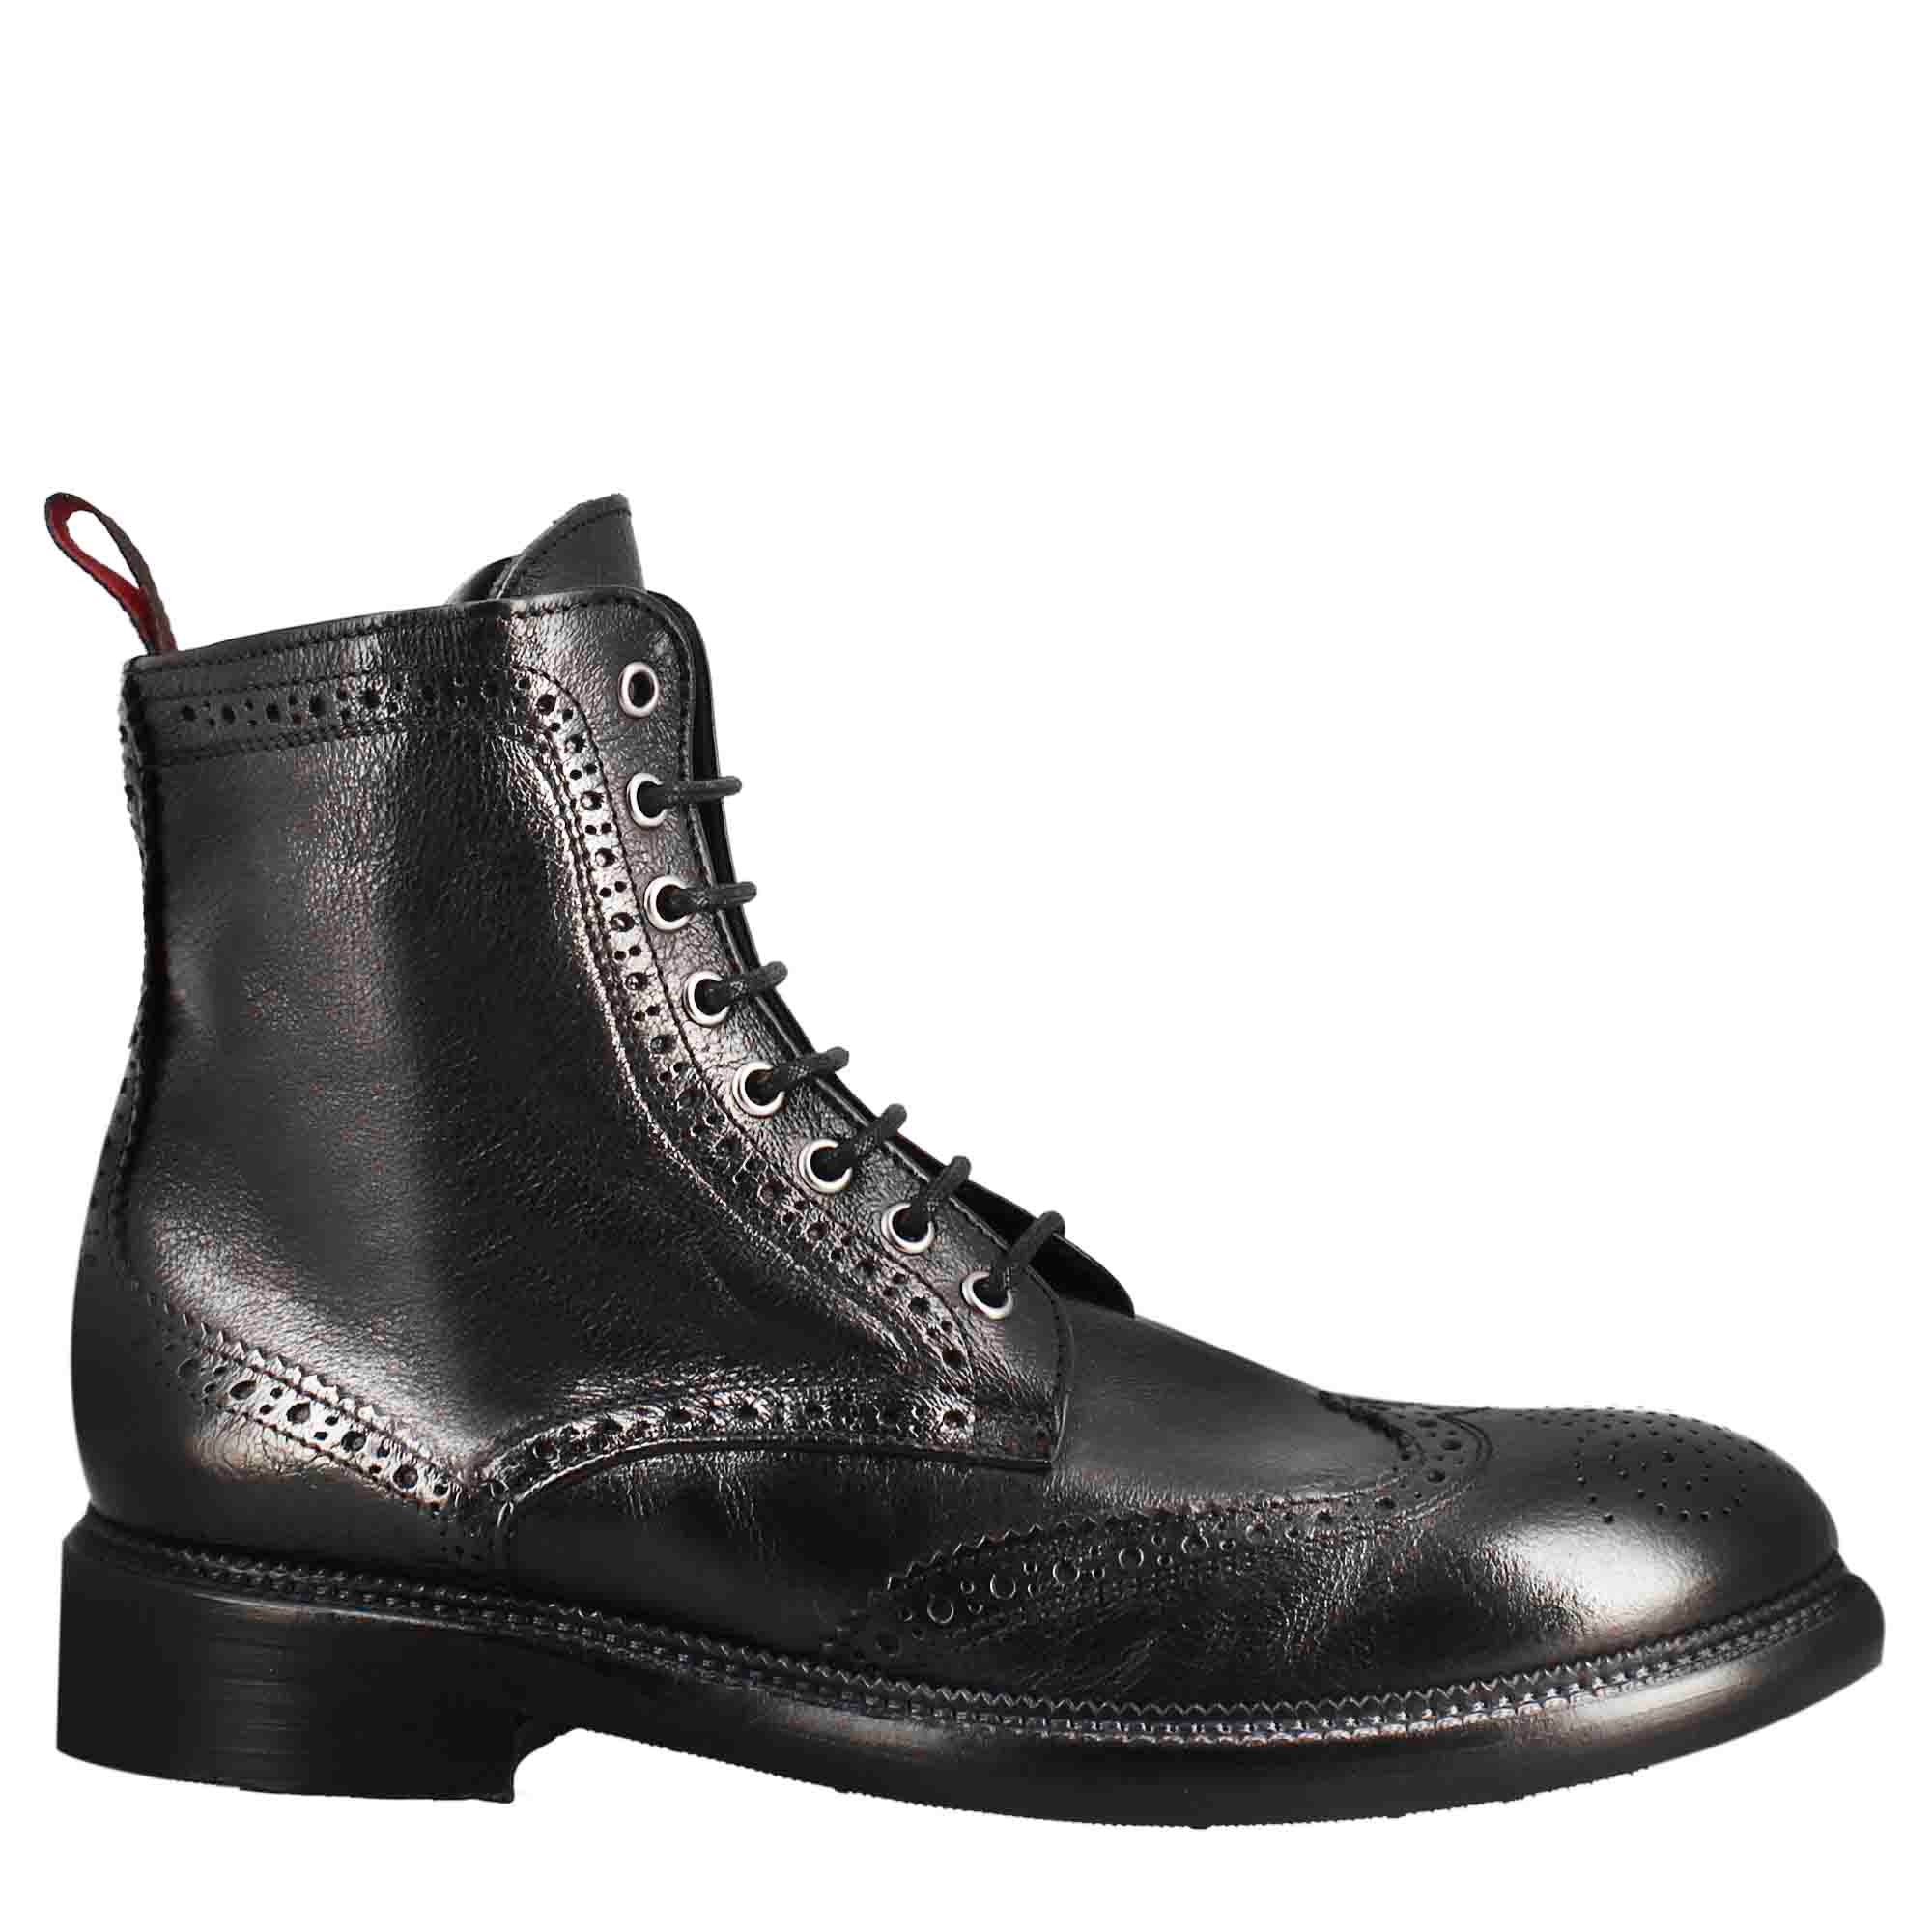 Black Washed Leather Boots